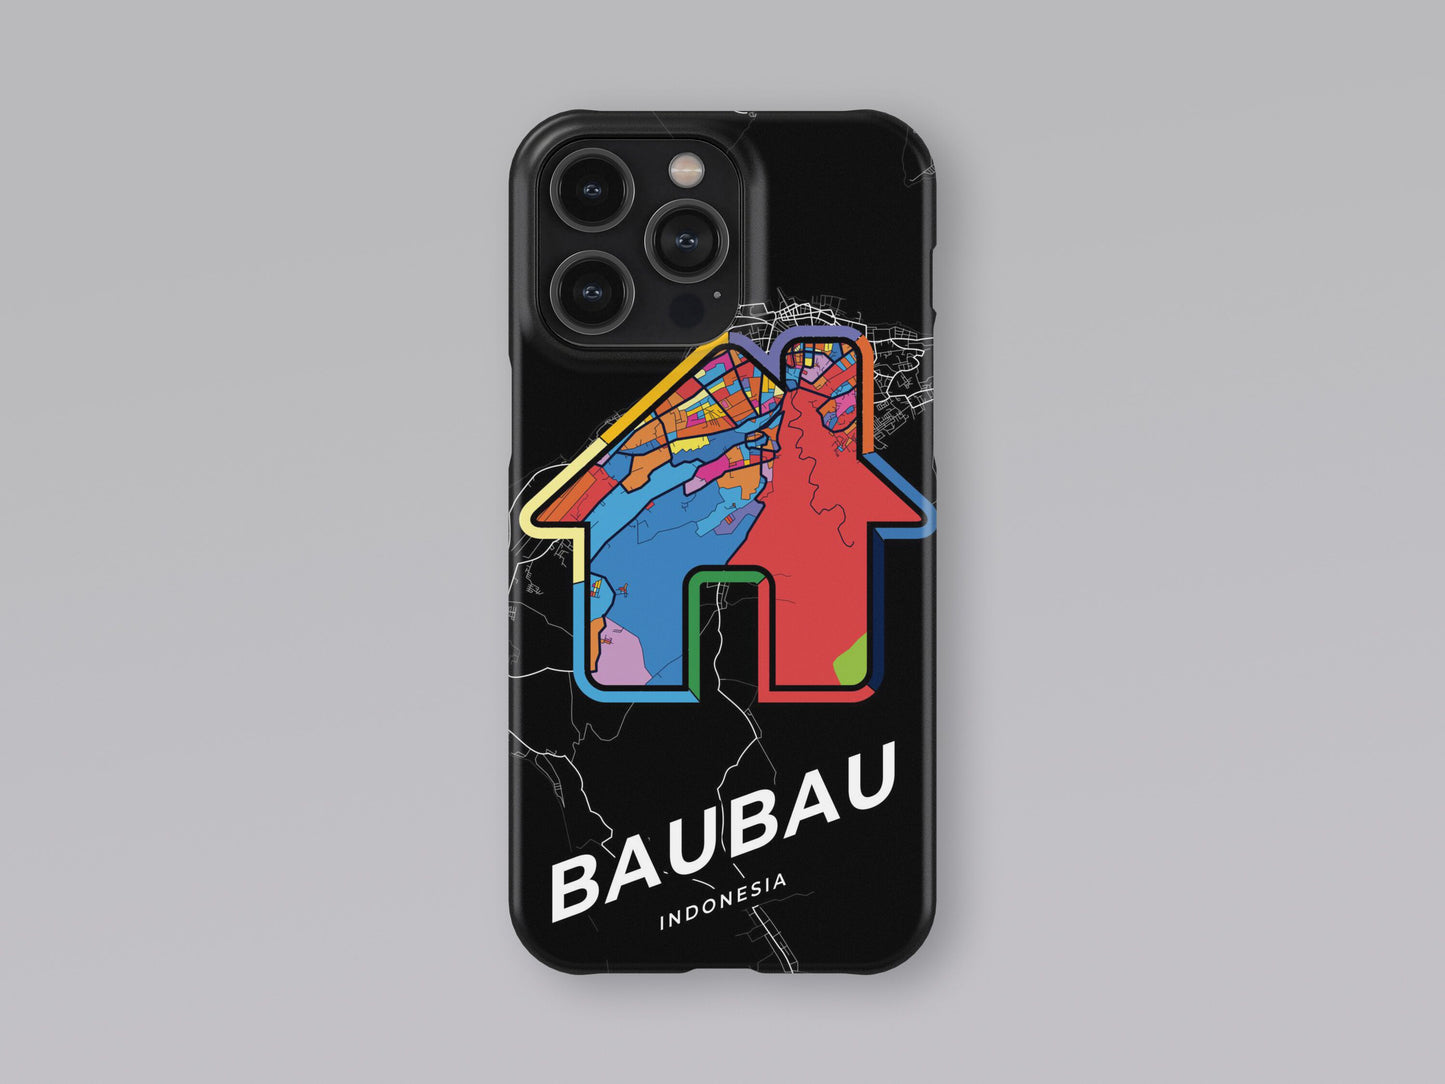 Baubau Indonesia slim phone case with colorful icon. Birthday, wedding or housewarming gift. Couple match cases. 3